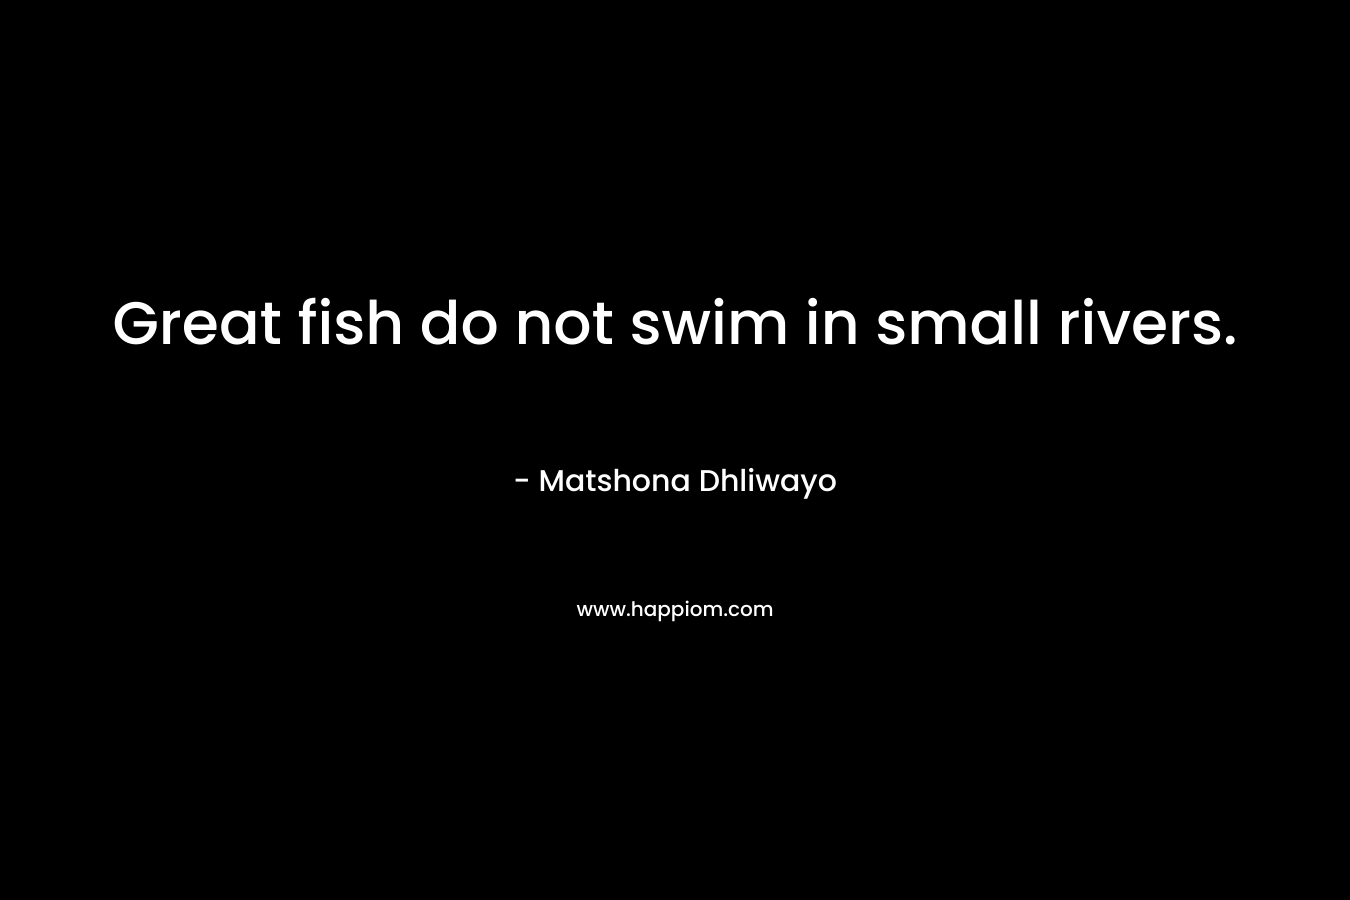 Great fish do not swim in small rivers.